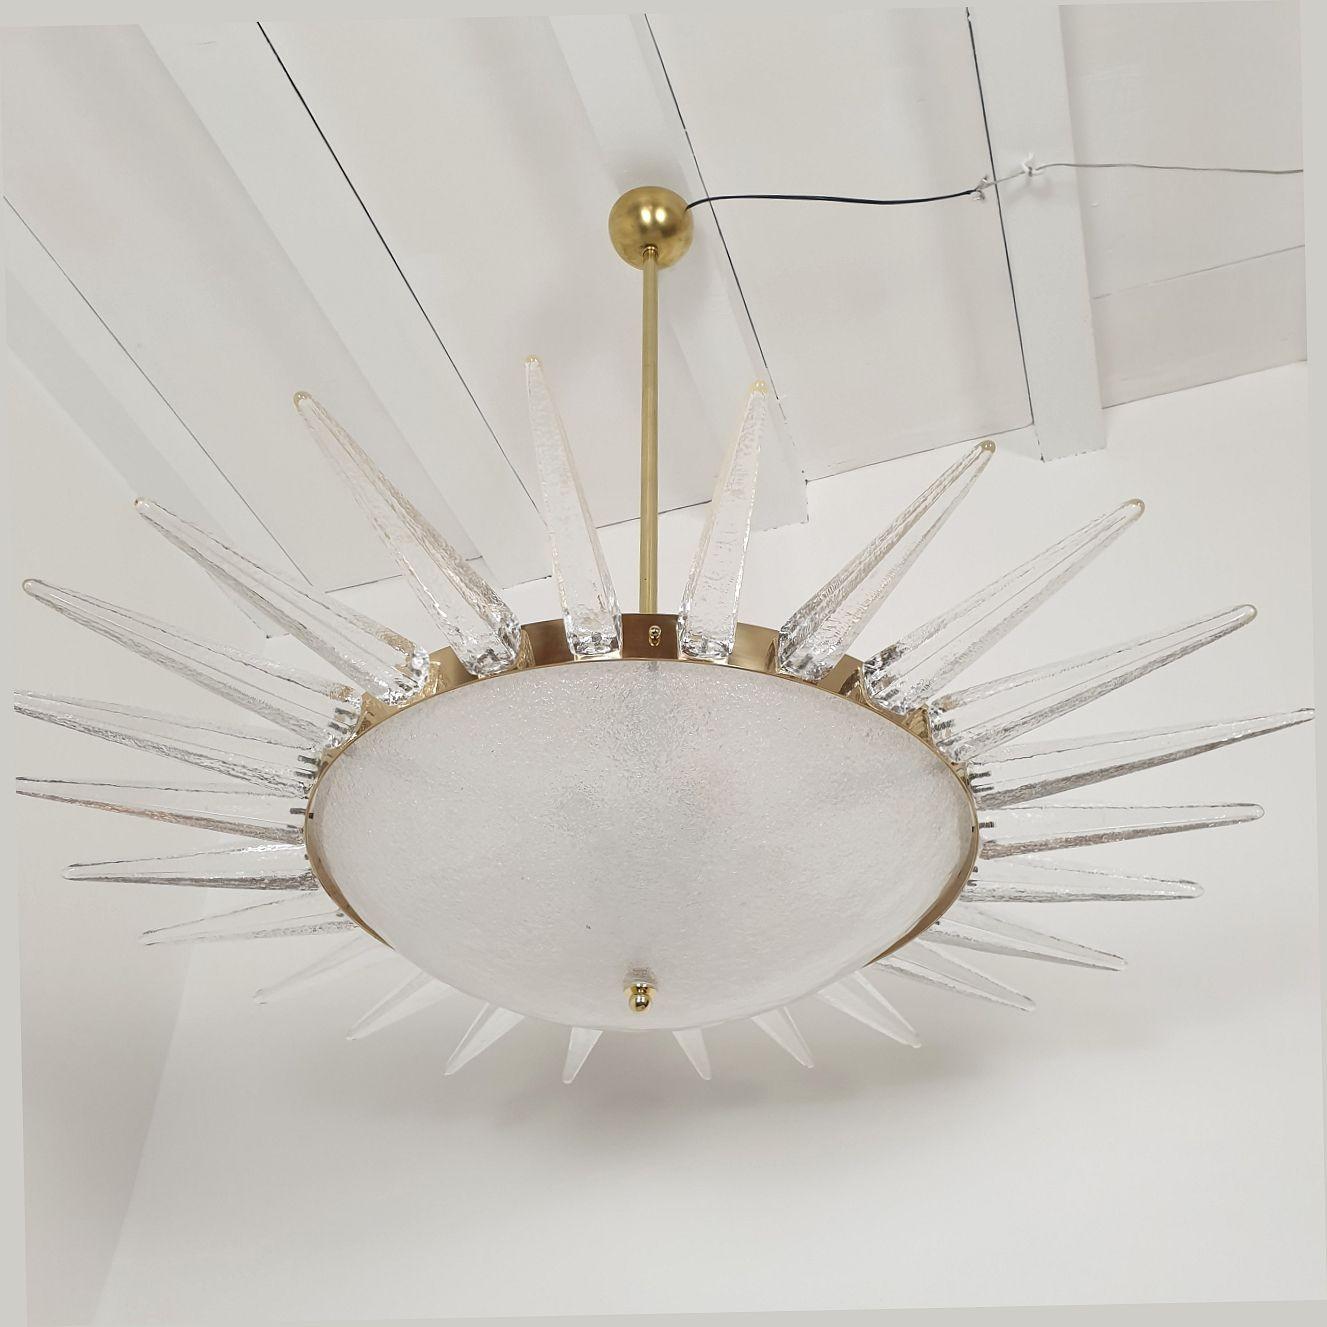 Mid Century Modern large Murano glass chandelier, attributed to Seguso, Italy 1970.
We have two chandeliers available - a pair - Sold and priced individually.
The chandelier is made of clear Murano glass: top and bottom central glasses are textured